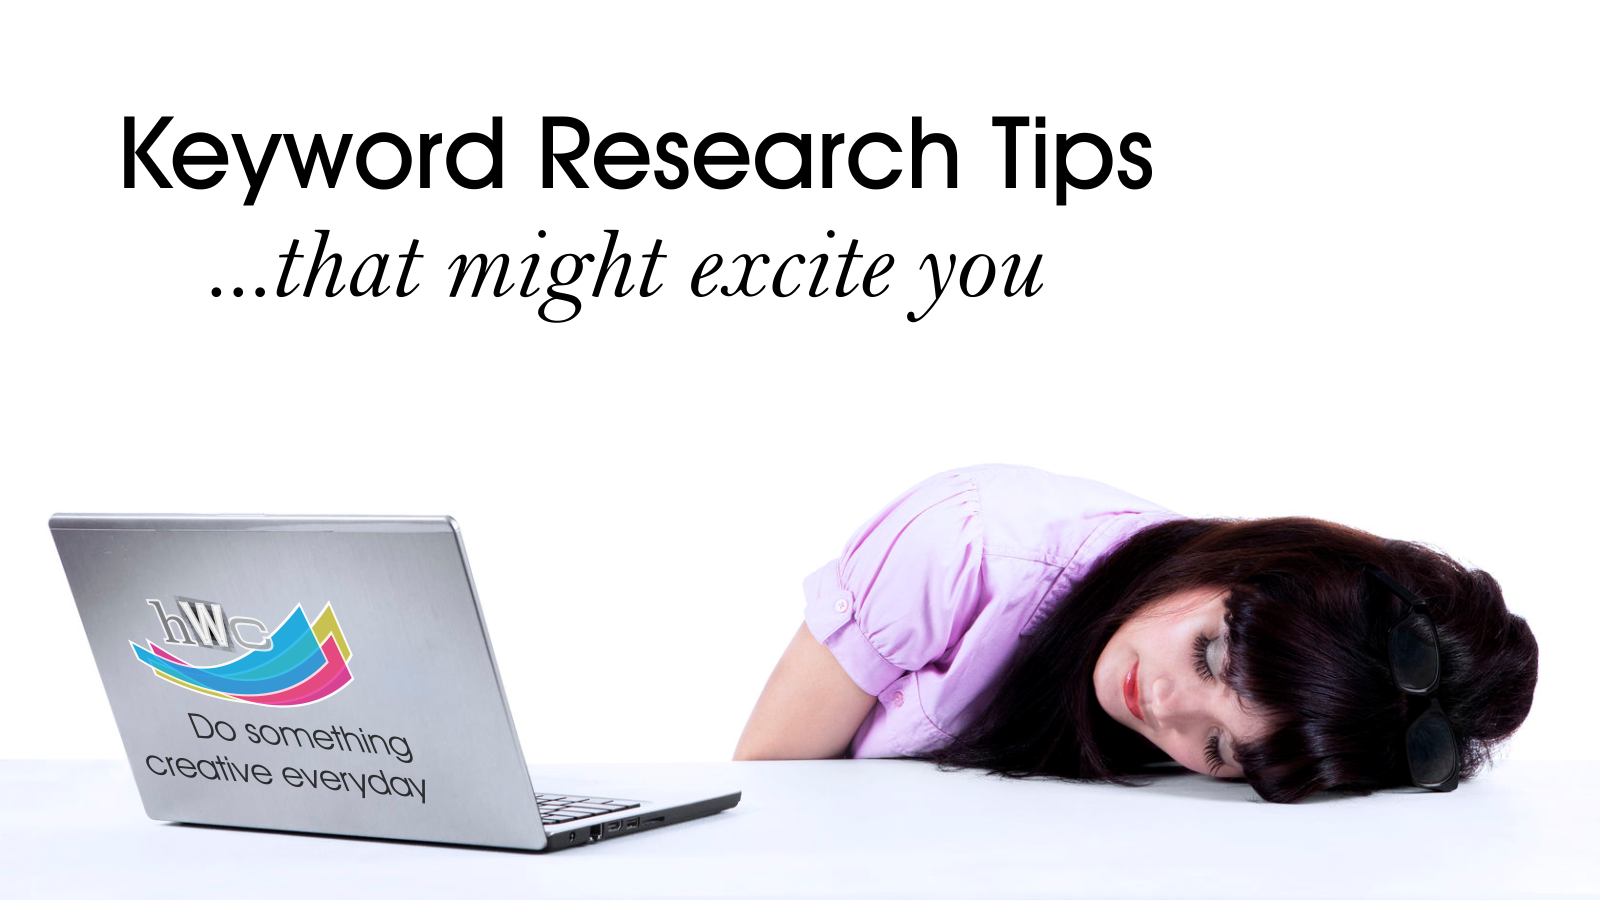 Keyword Research Tips 2015